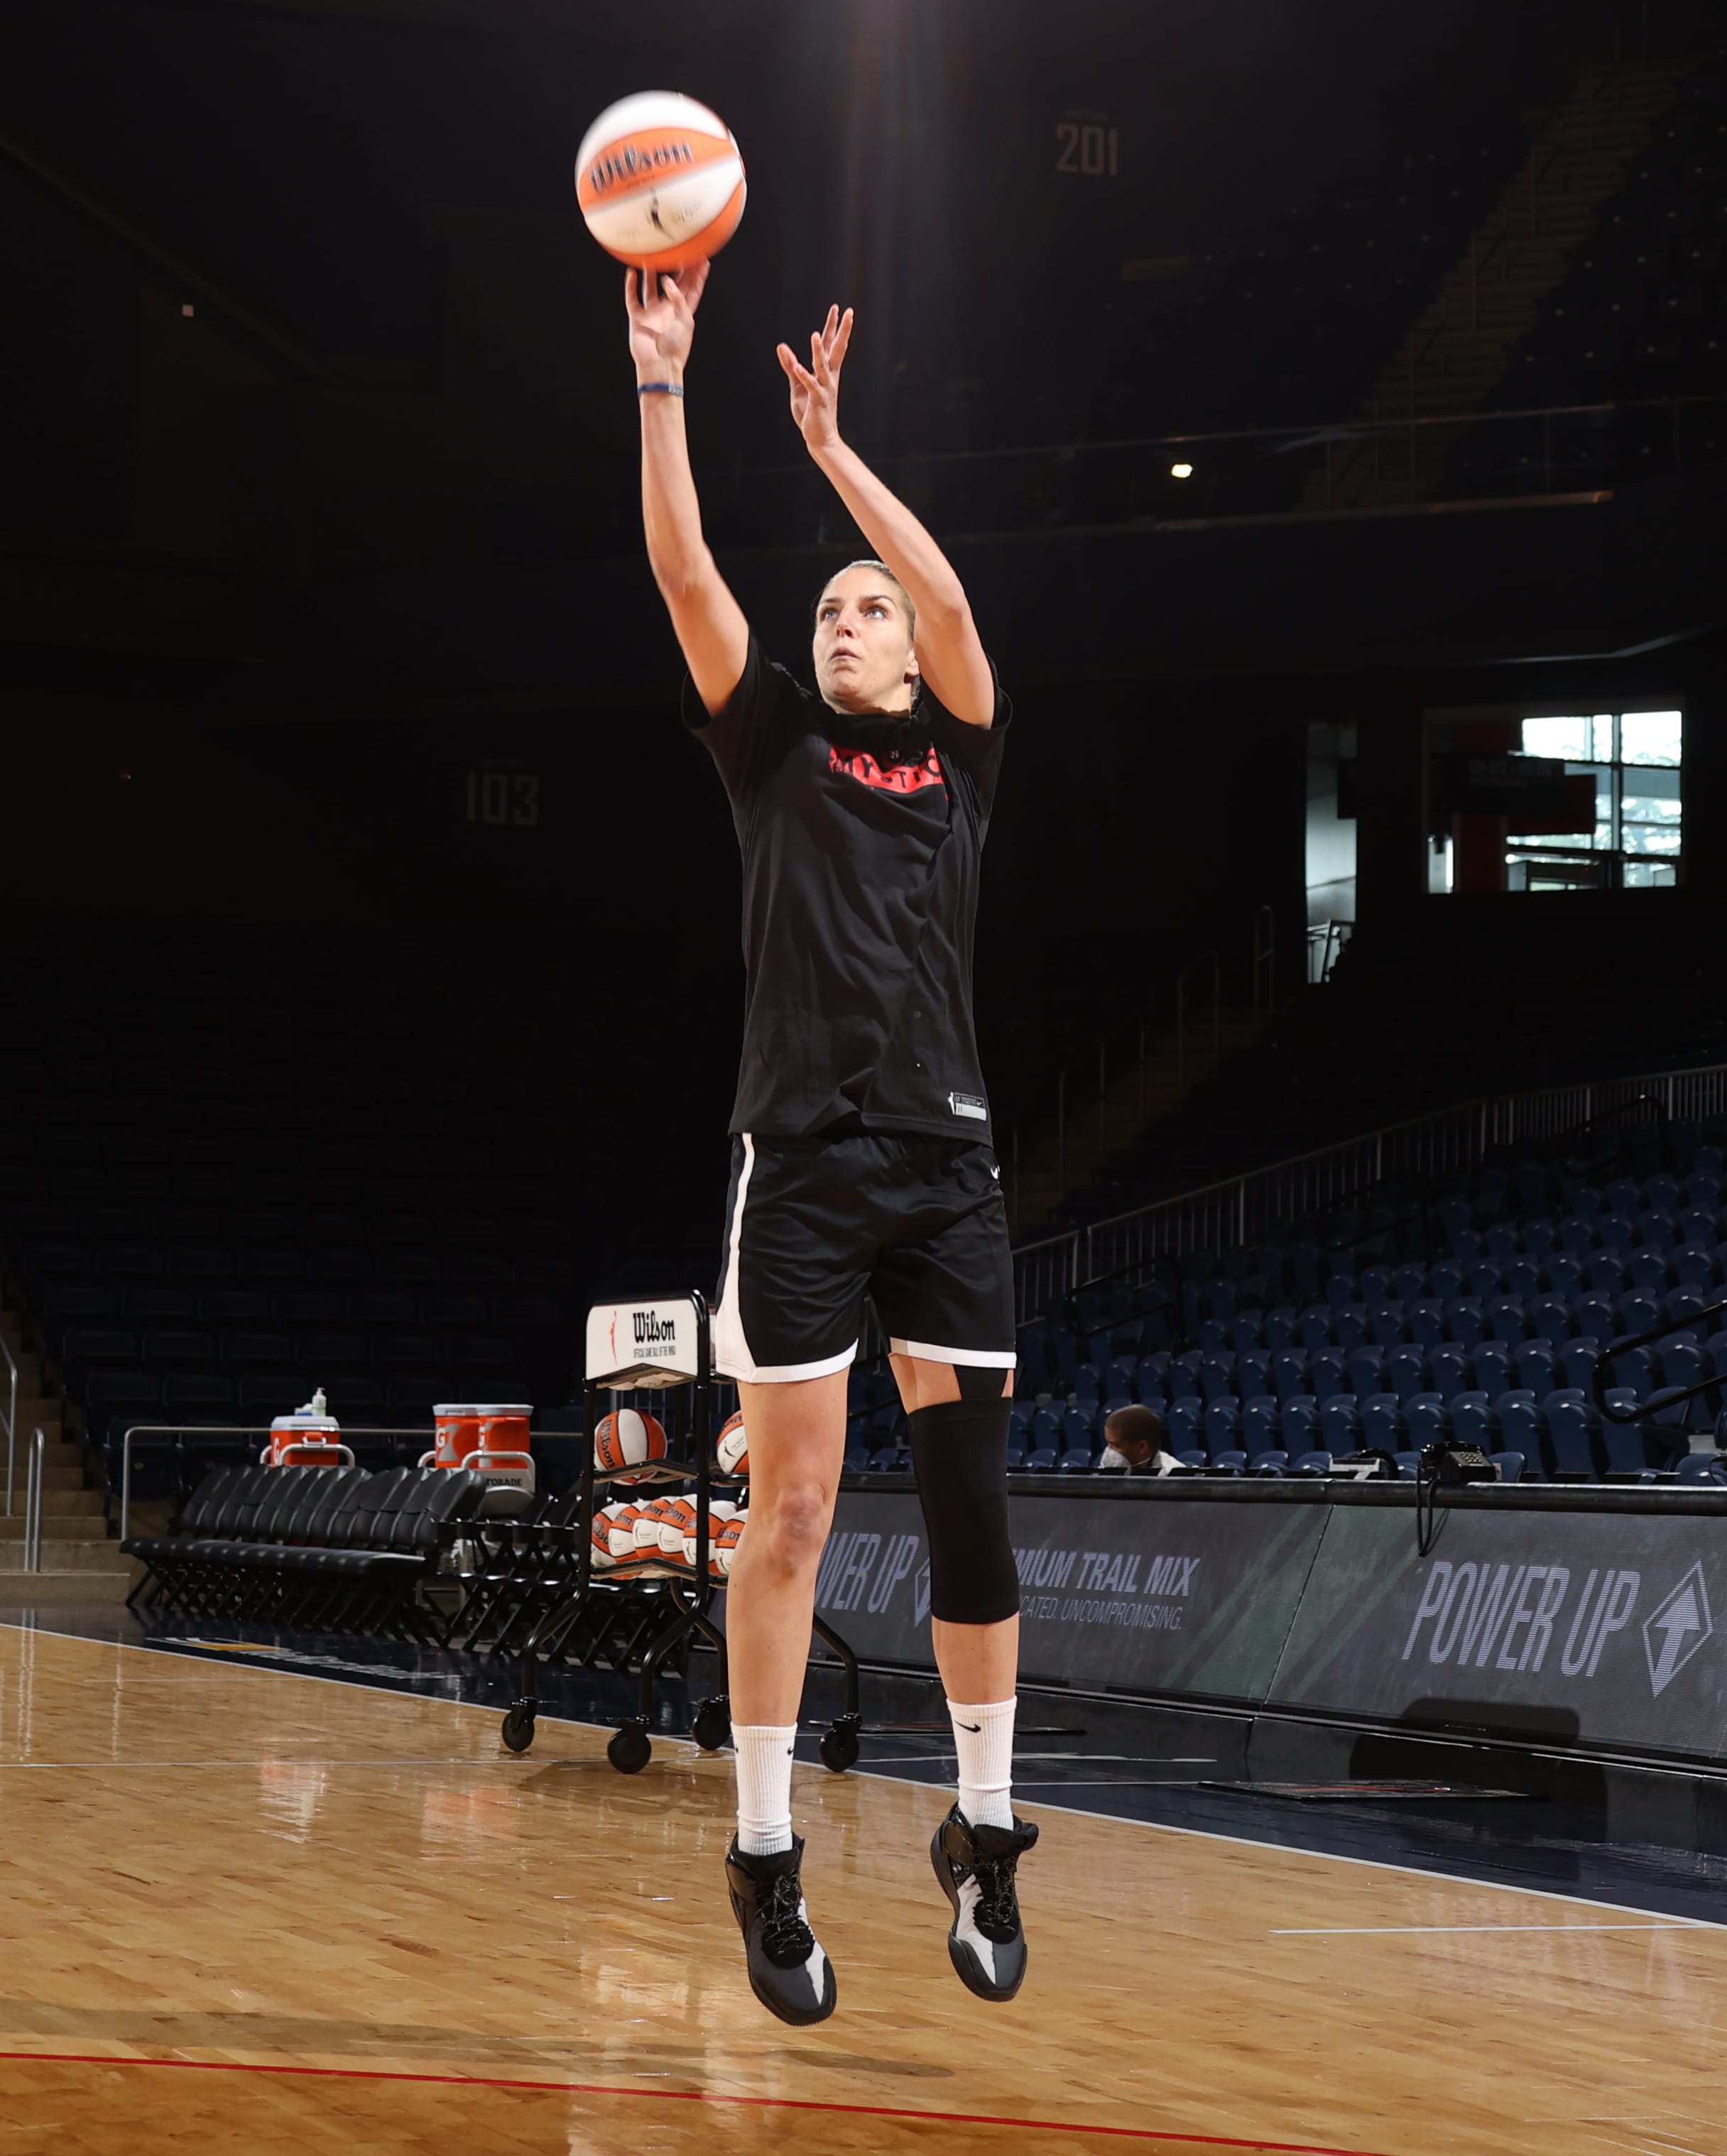 tunnel Basic theory Shaded Elena Delle Donne Debuts New Nike Basketball Sneaker - Golf Single Player